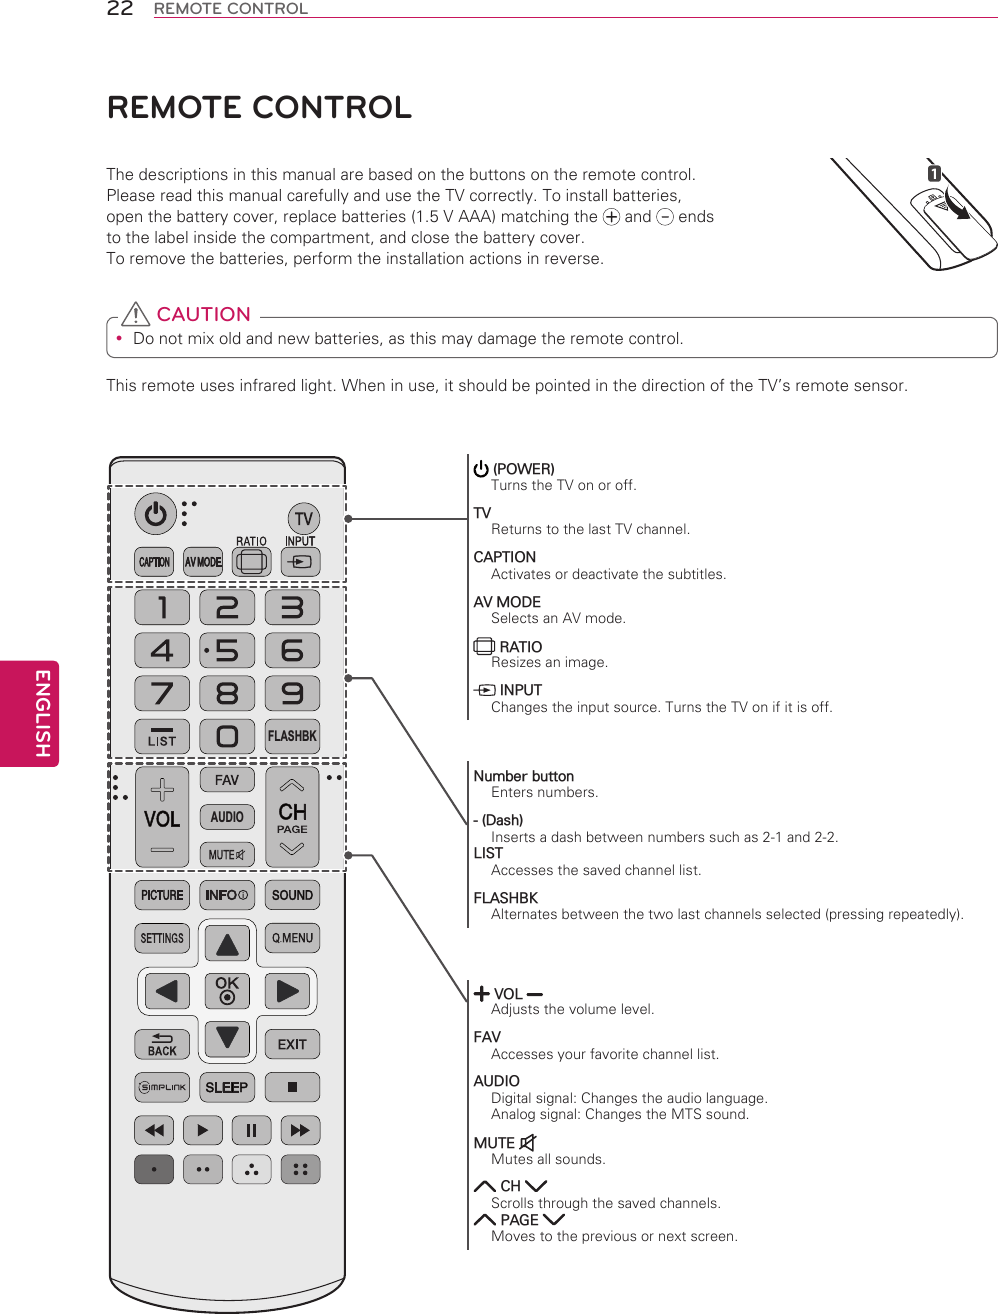 ENGLISH22 REMOTE CONTROLFLASHBKAUDIOREMOTE CONTROLThe descriptions in this manual are based on the buttons on the remote control.  Please read this manual carefully and use the TV correctly. To install batteries,  open the battery cover, replace batteries (1.5 V AAA) matching the   and   ends to the label inside the compartment, and close the battery cover.  To remove the batteries, perform the installation actions in reverse. Do not mix old and new batteries, as this may damage the remote control. CAUTIONThis remote uses infrared light. When in use, it should be pointed in the direction of the TV’s remote sensor. (POWER)Turns the TV on or off.TVReturns to the last TV channel.CAPTIONActivates or deactivate the subtitles.AV MODESelects an AV mode. RATIOResizes an image. INPUTChanges the input source. Turns the TV on if it is off. VOL Adjusts the volume level.FAVAccesses your favorite channel list.AUDIODigital signal: Changes the audio language.Analog signal: Changes the MTS sound.MUTE Mutes all sounds. CH Scrolls through the saved channels. PAGE Moves to the previous or next screen.Number buttonEnters numbers.- (Dash)Inserts a dash between numbers such as 2-1 and 2-2.LISTAccesses the saved channel list.FLASHBKAlternates between the two last channels selected (pressing repeatedly).